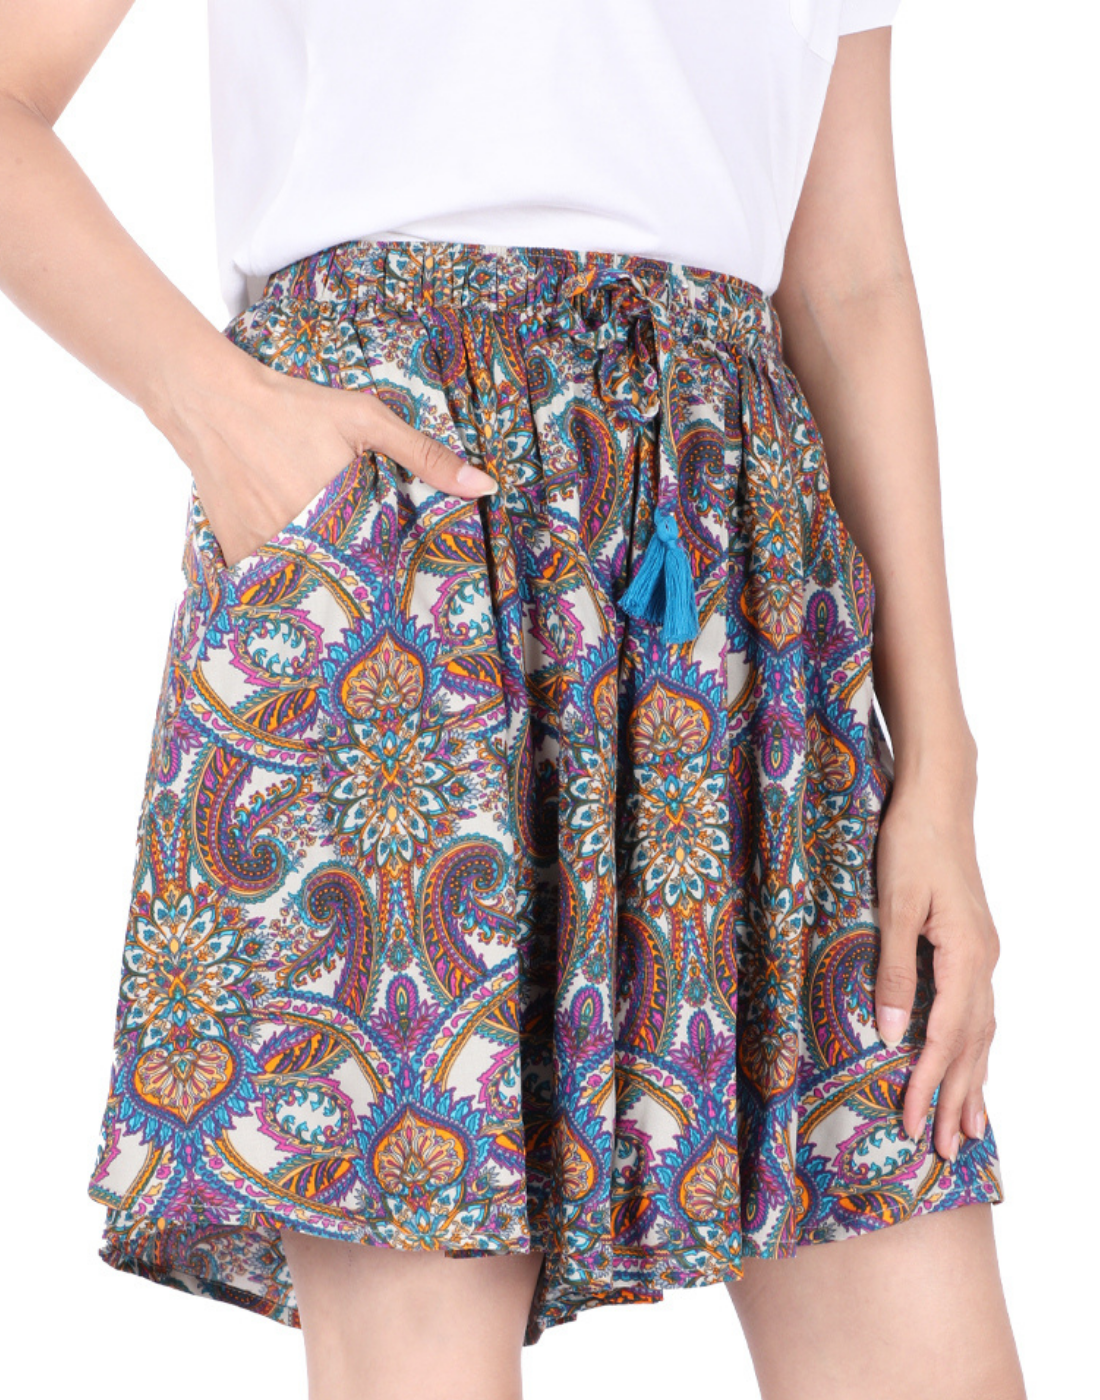 Culottes Shorts for Women-Paisley